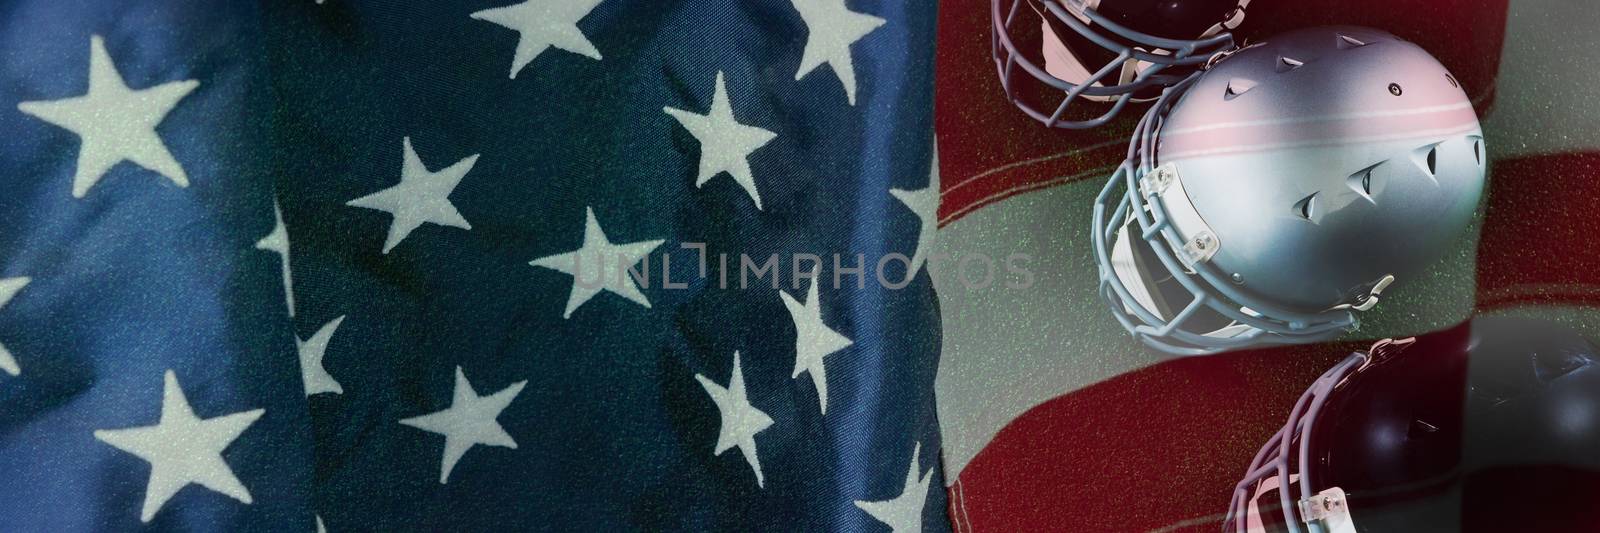 High angle view of American football head gears against close-up of an american flag